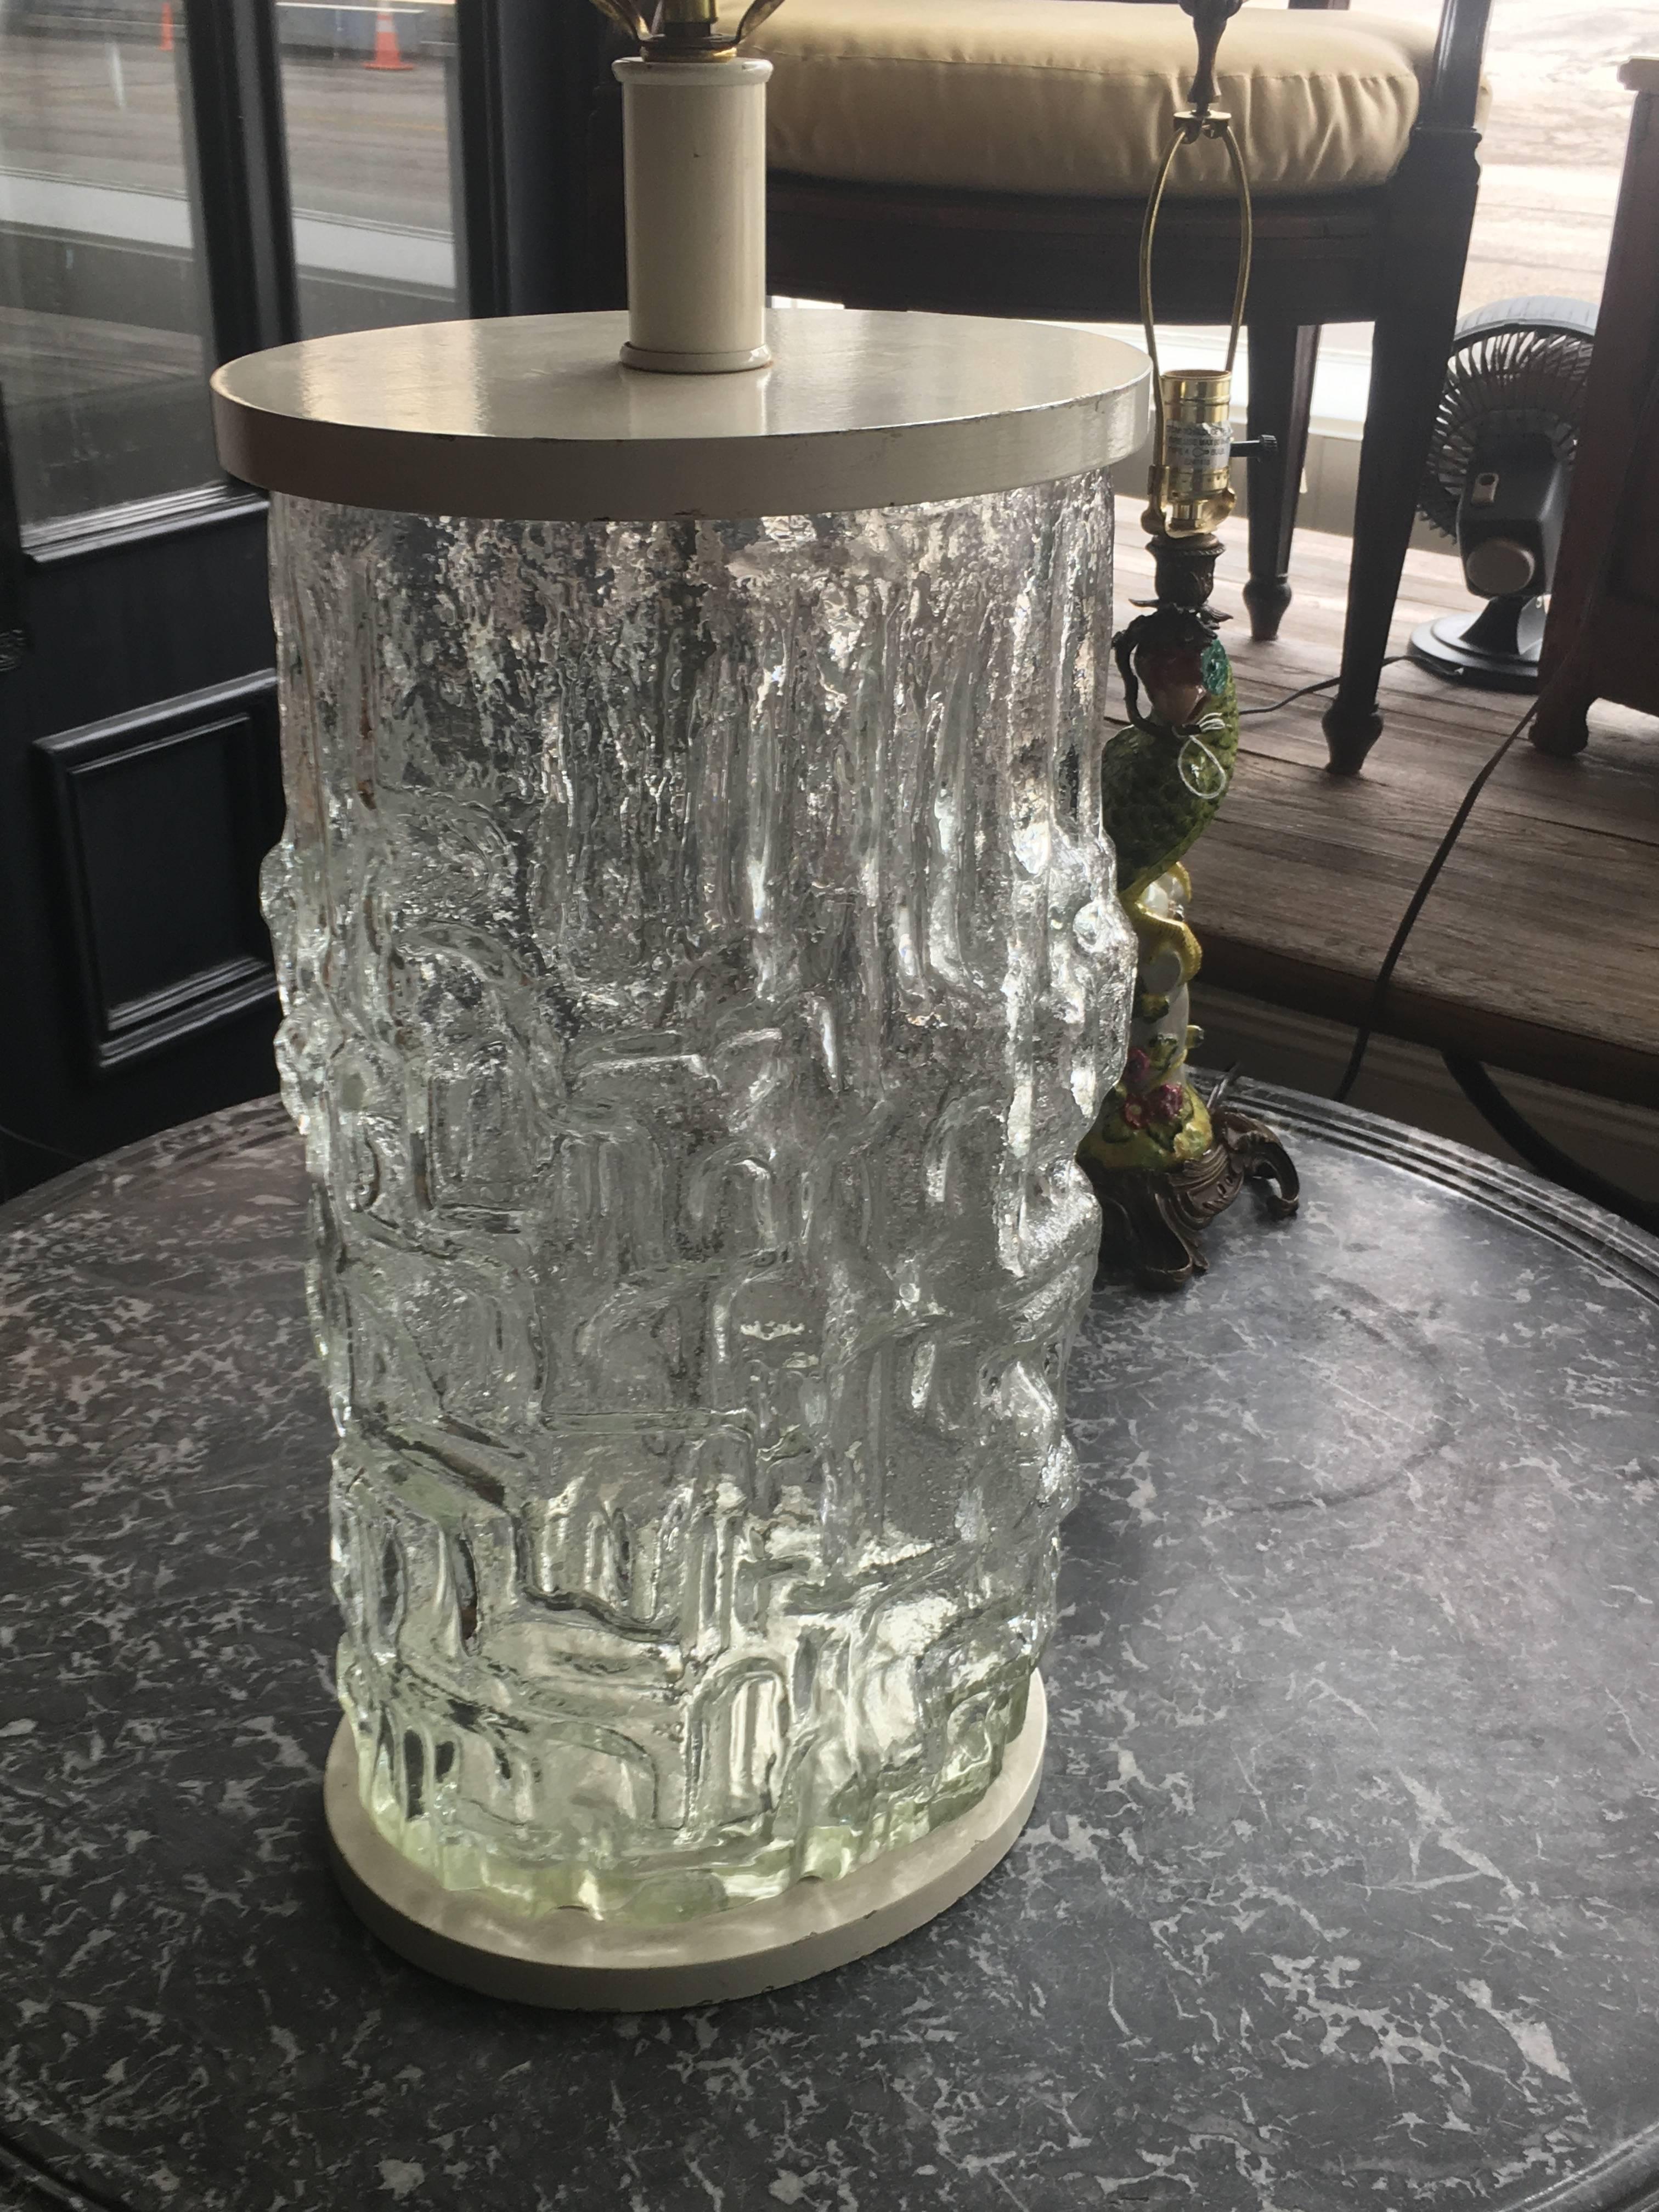 A Swedish glass vase
Midcentury
of cylindrical form with textured exterior, mounted as a lamp with cloth shade.
Measures: Height overall 38 1/4 inches.